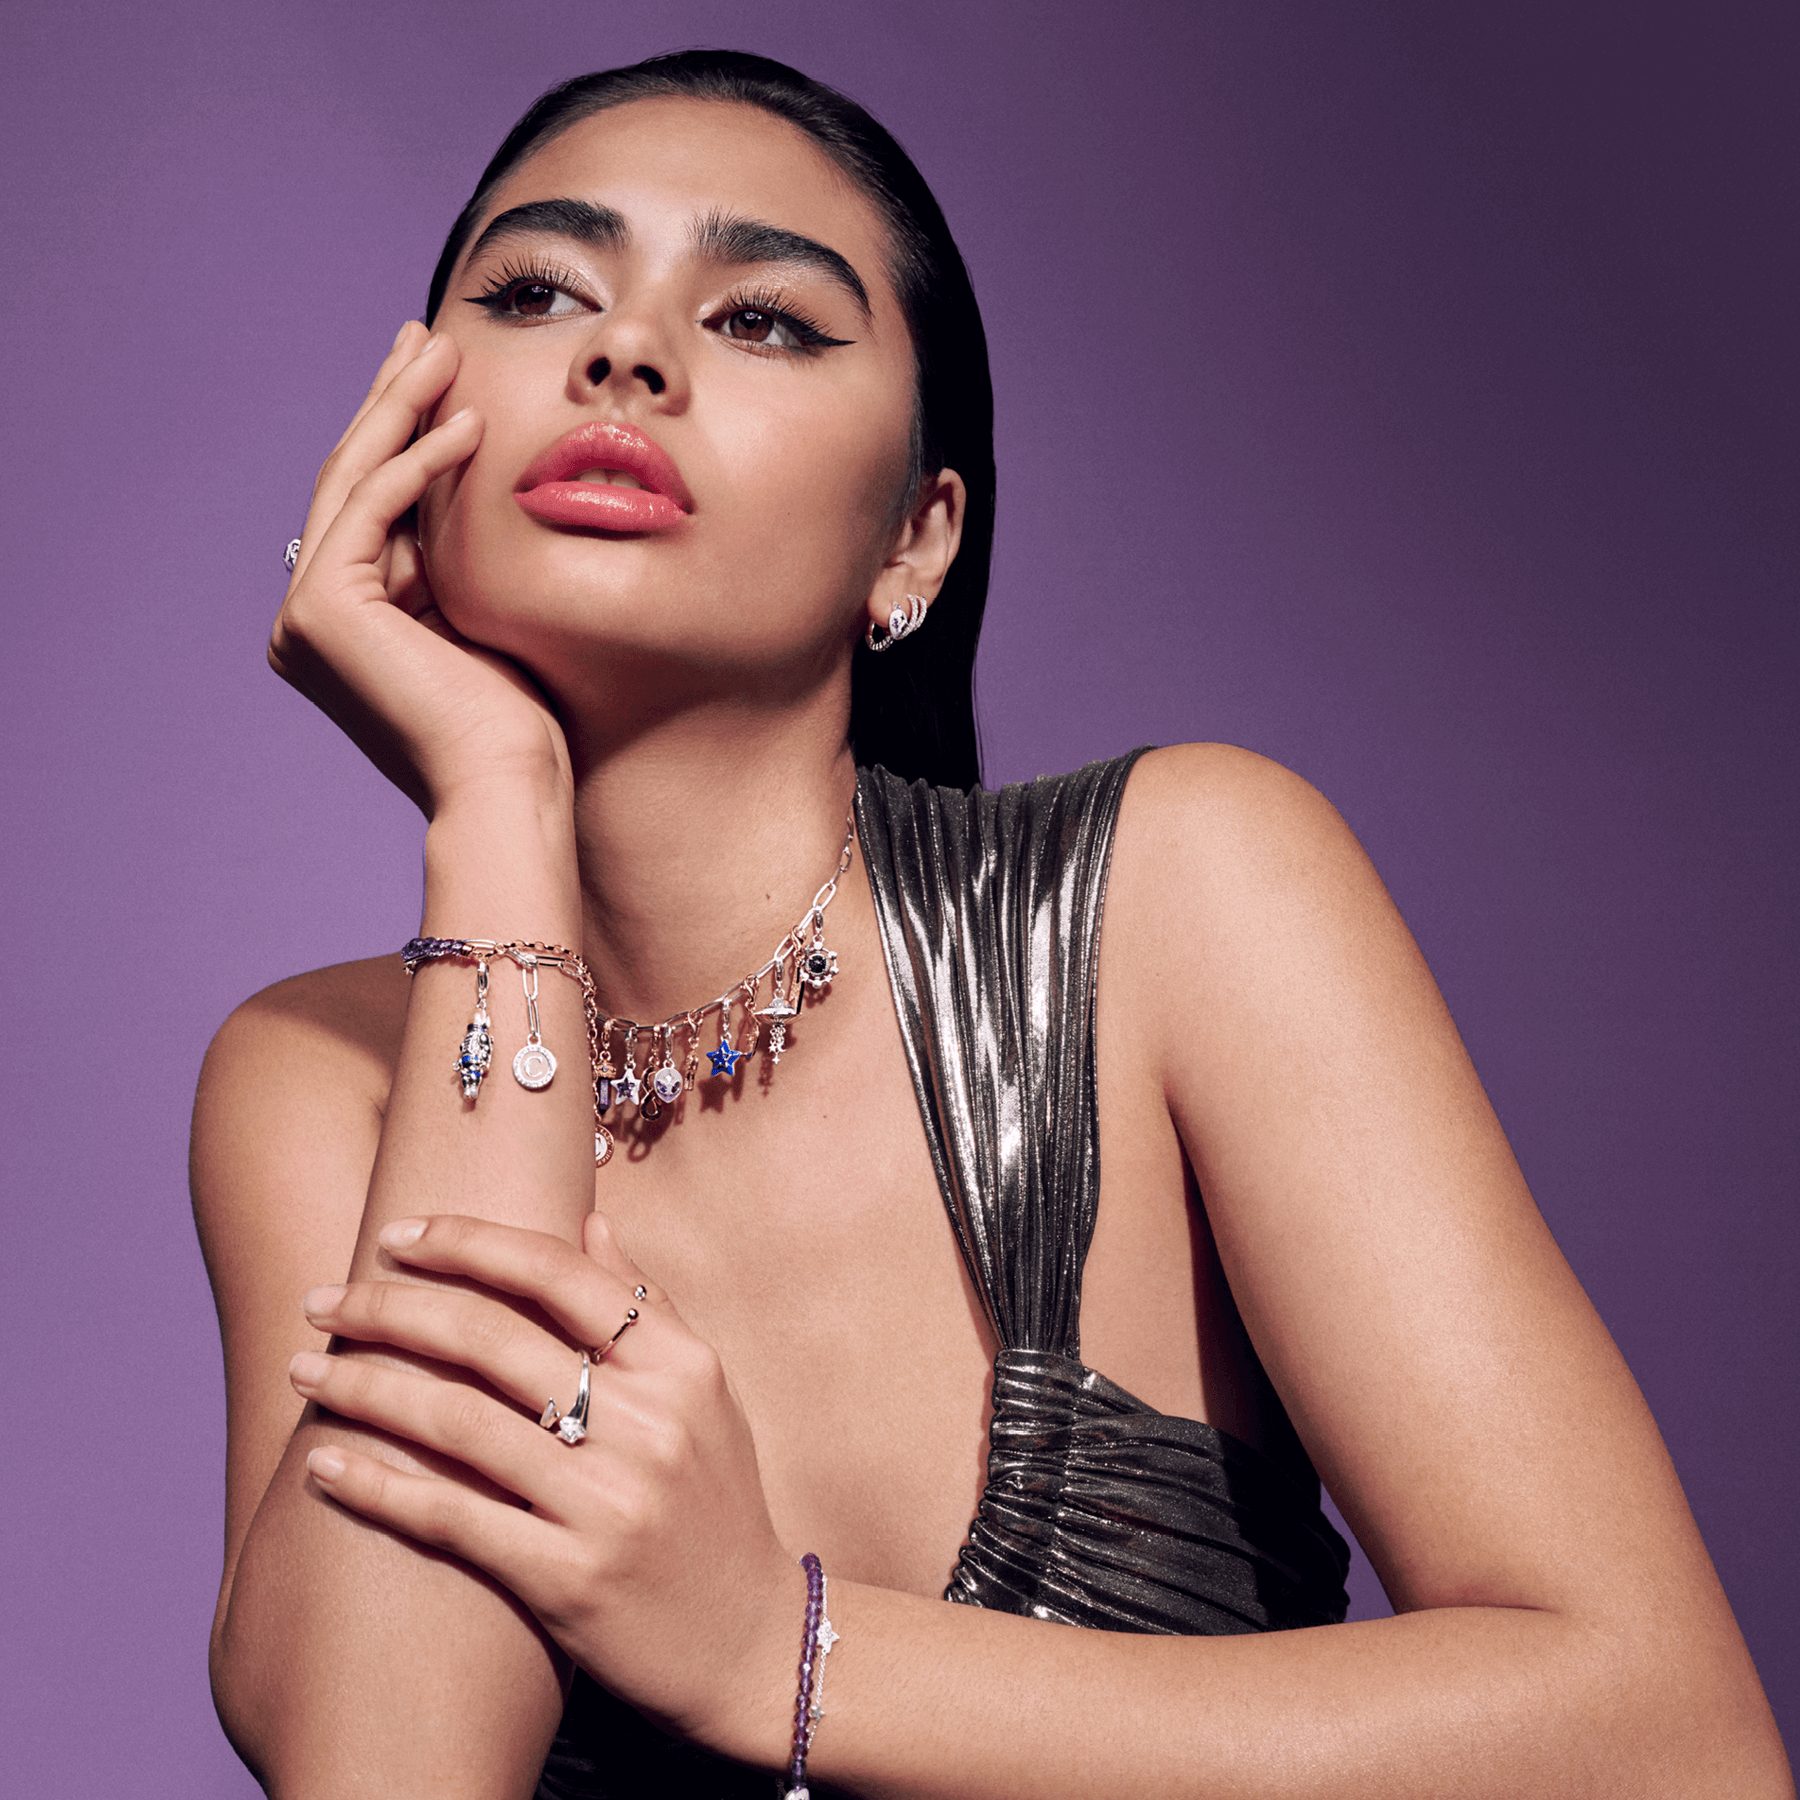 Subscribe to the THOMAS SABO newsletter